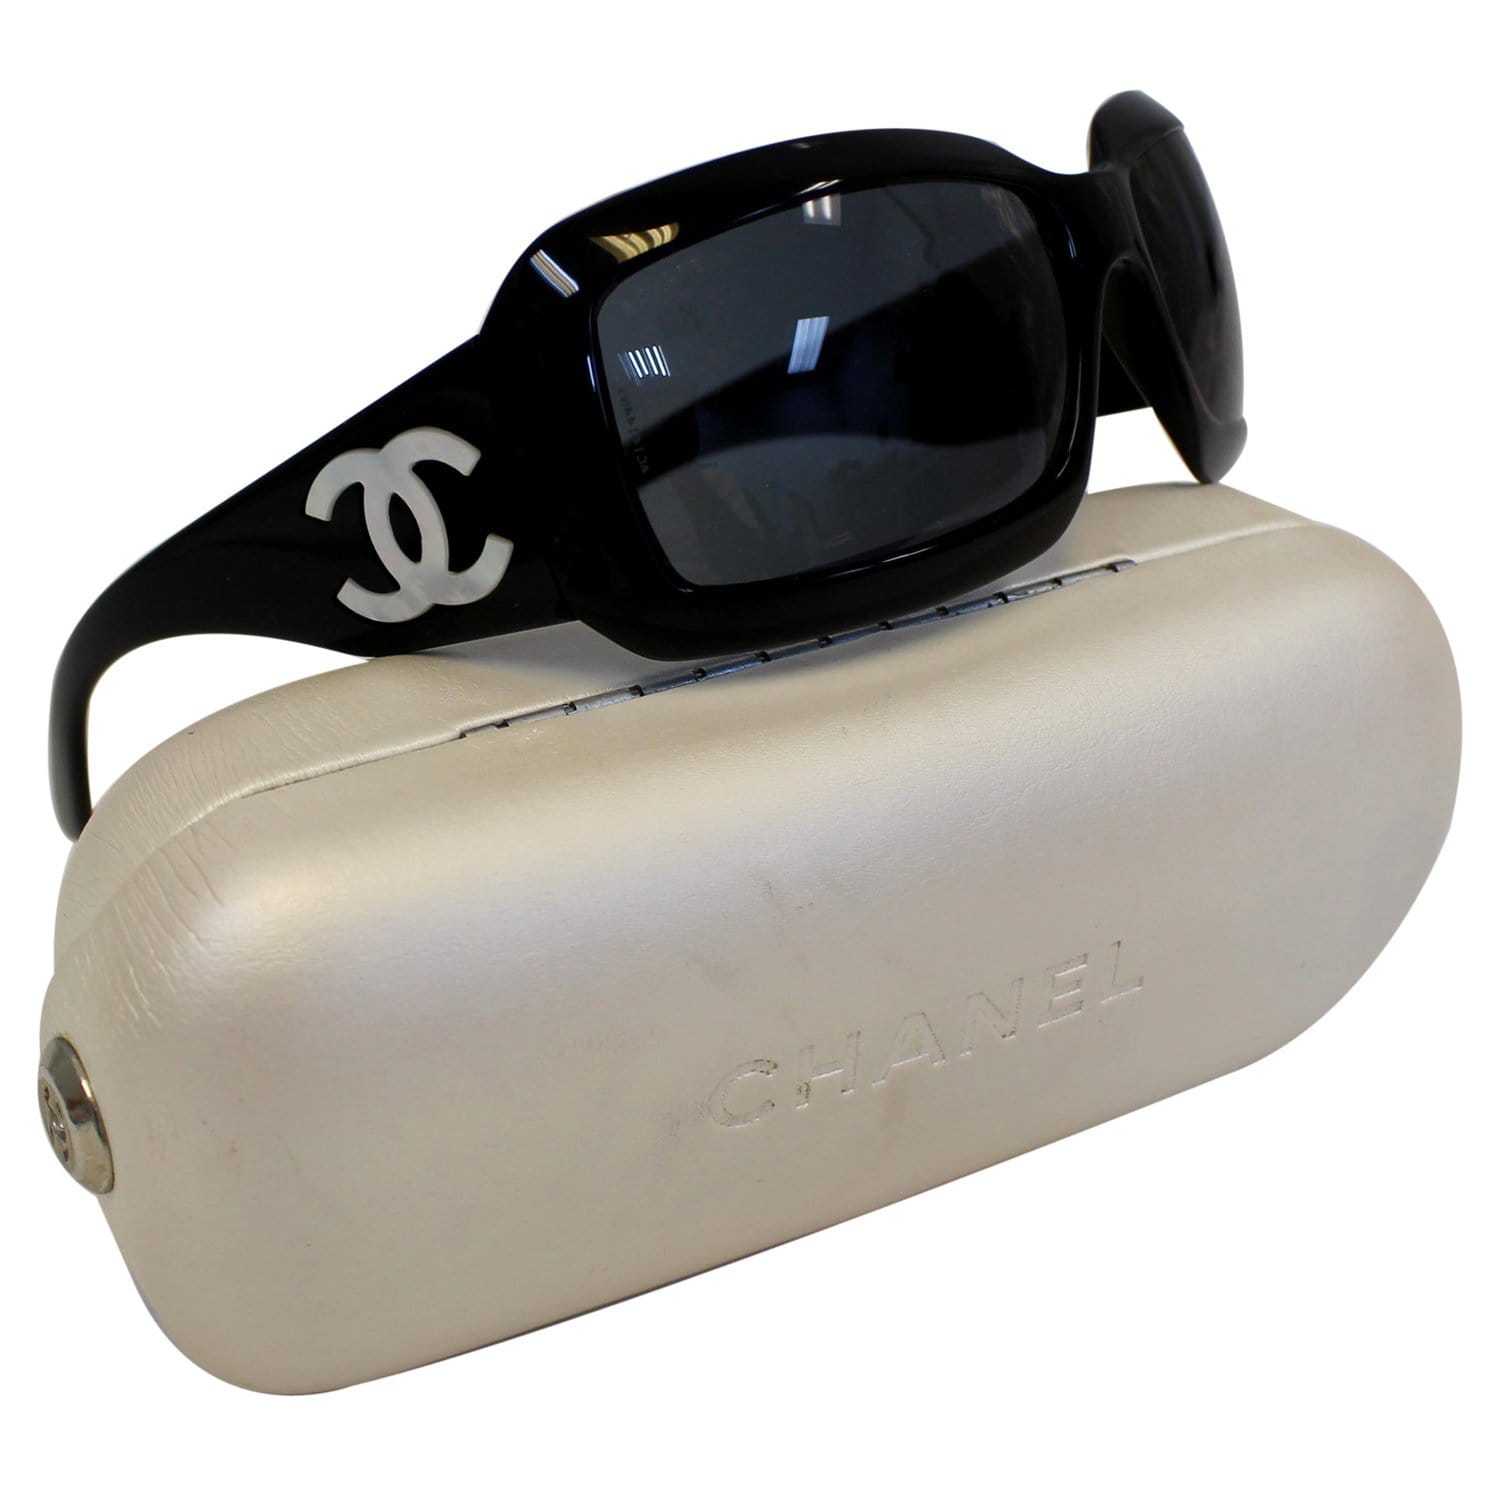 chanel sunglasses that say chanel on the side